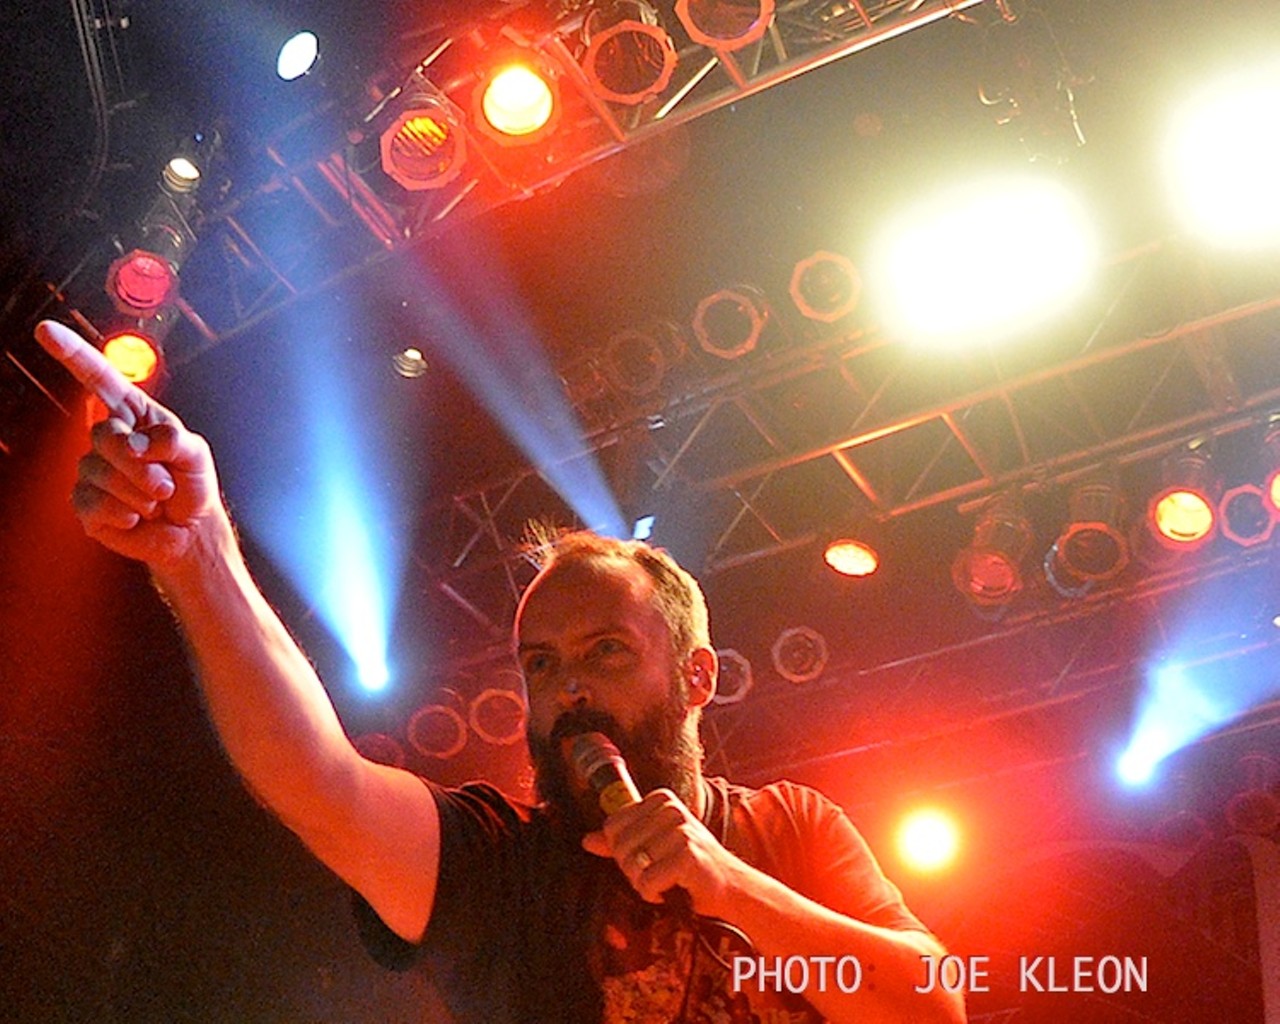 Clutch Performing at House of Blues